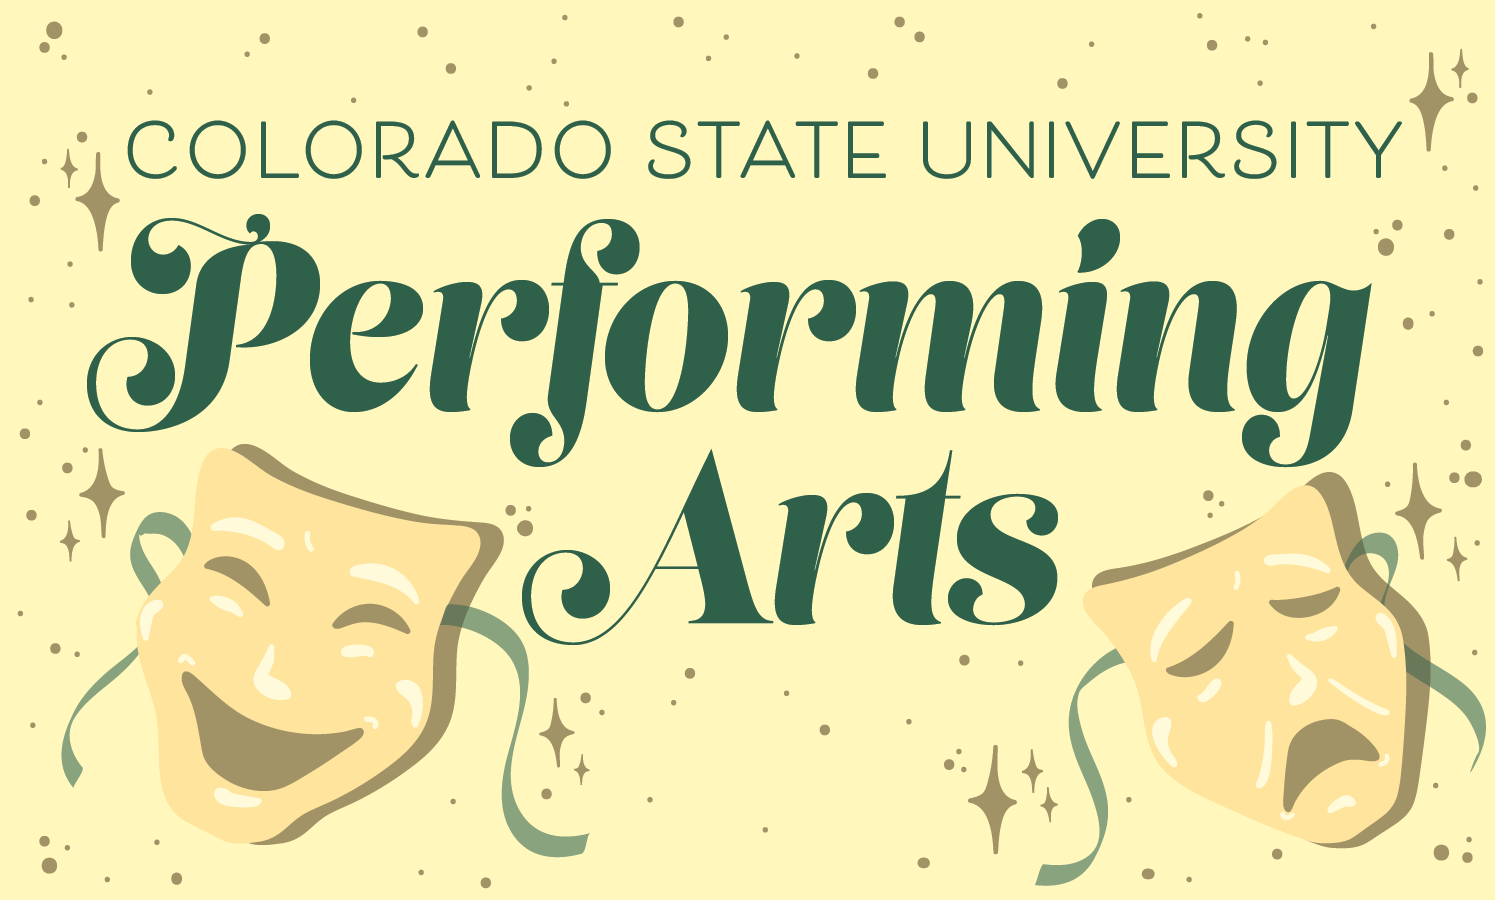 A light yellow graphic depicting two theater mood masks, titled "Colorado State University Preforming Arts" in green letters.